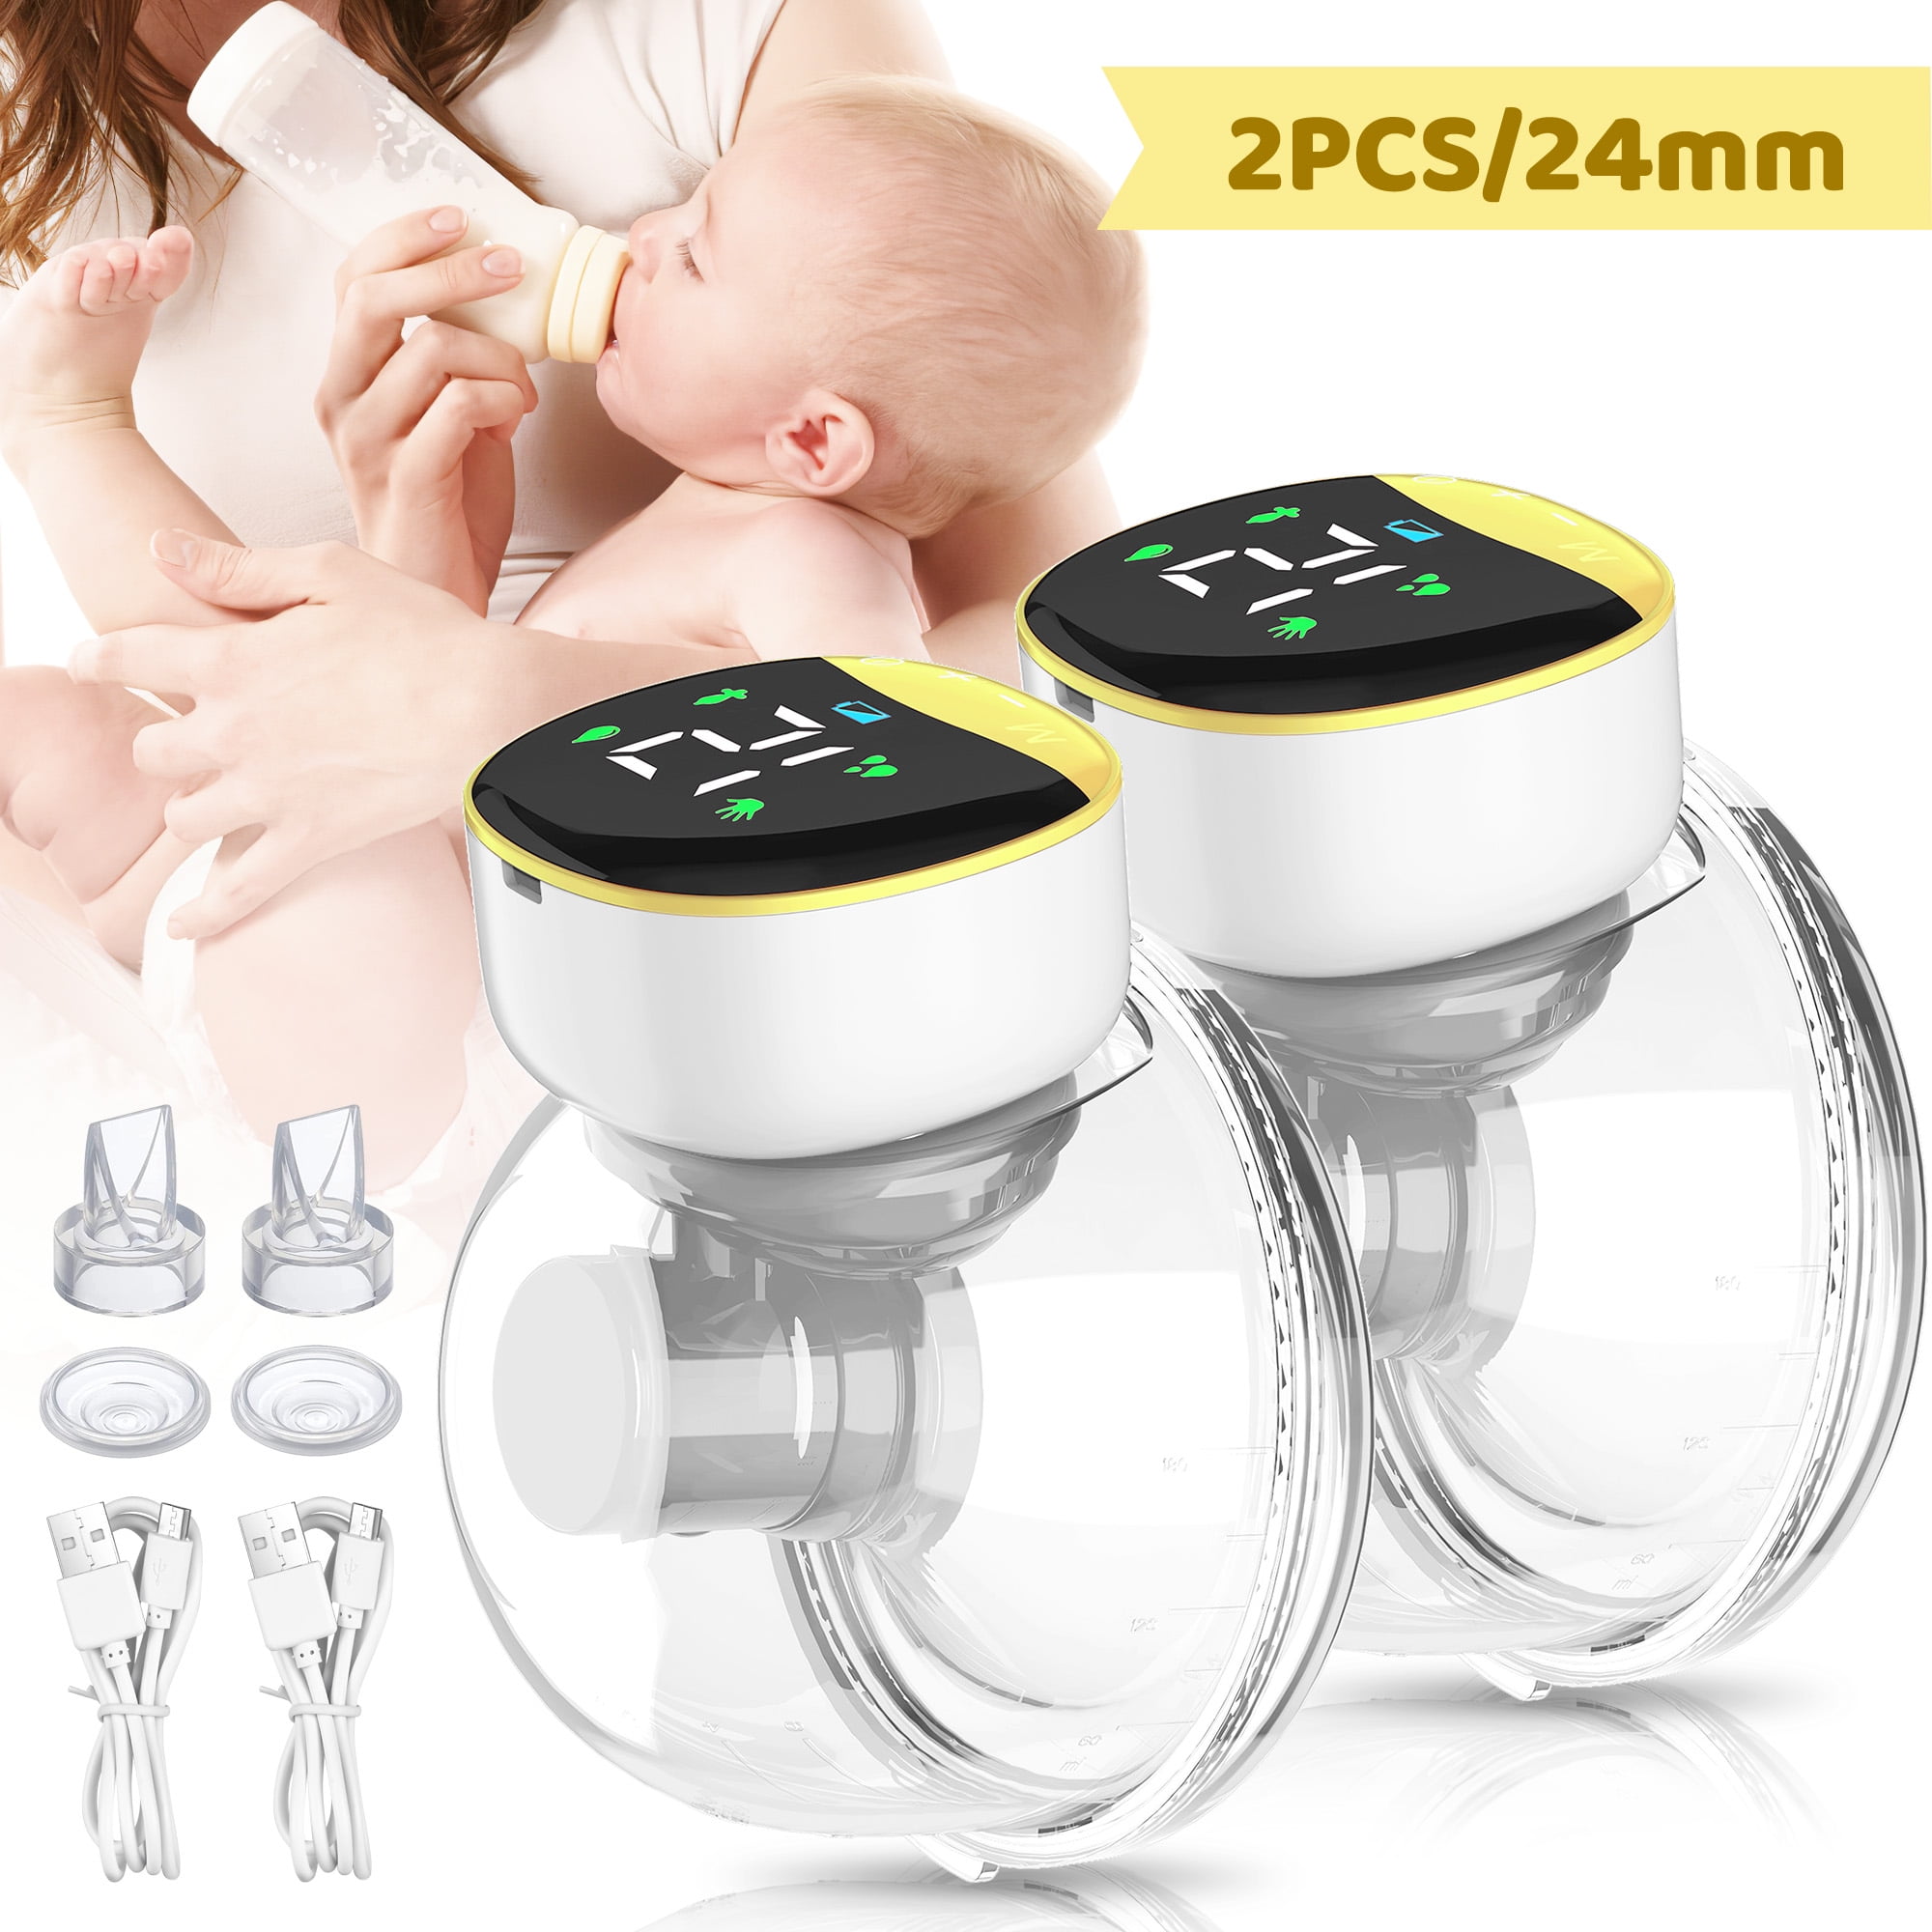 Momcozy Muse 5 Hands Free Breast Pump Wearable, Electric Breast